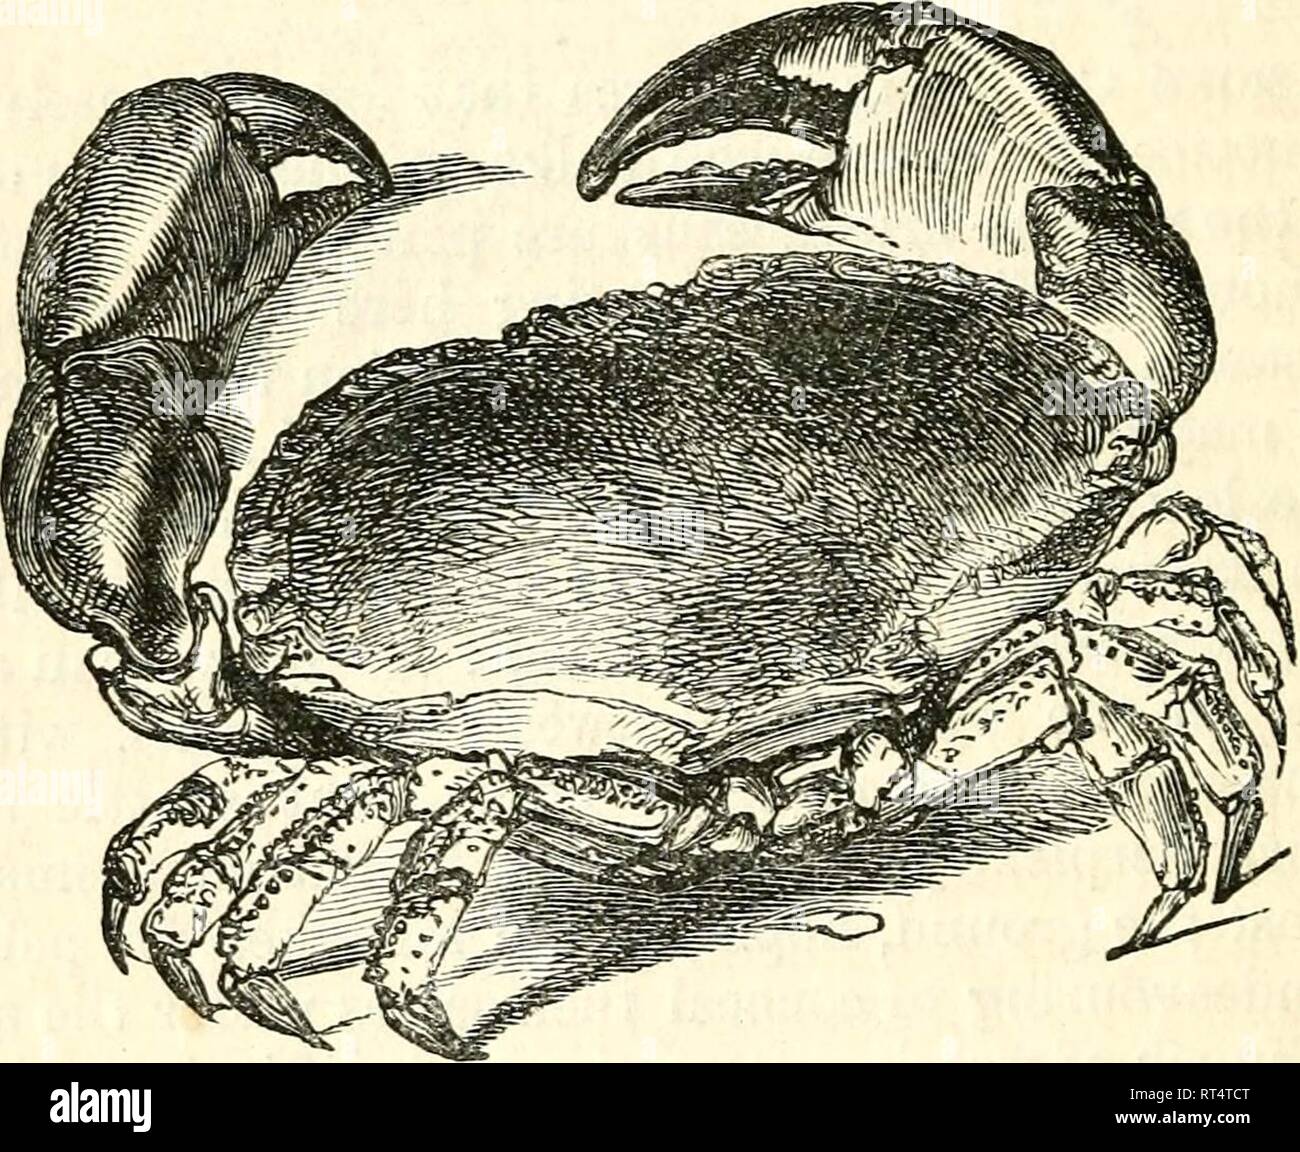 Illustration of a crab Stock Photo